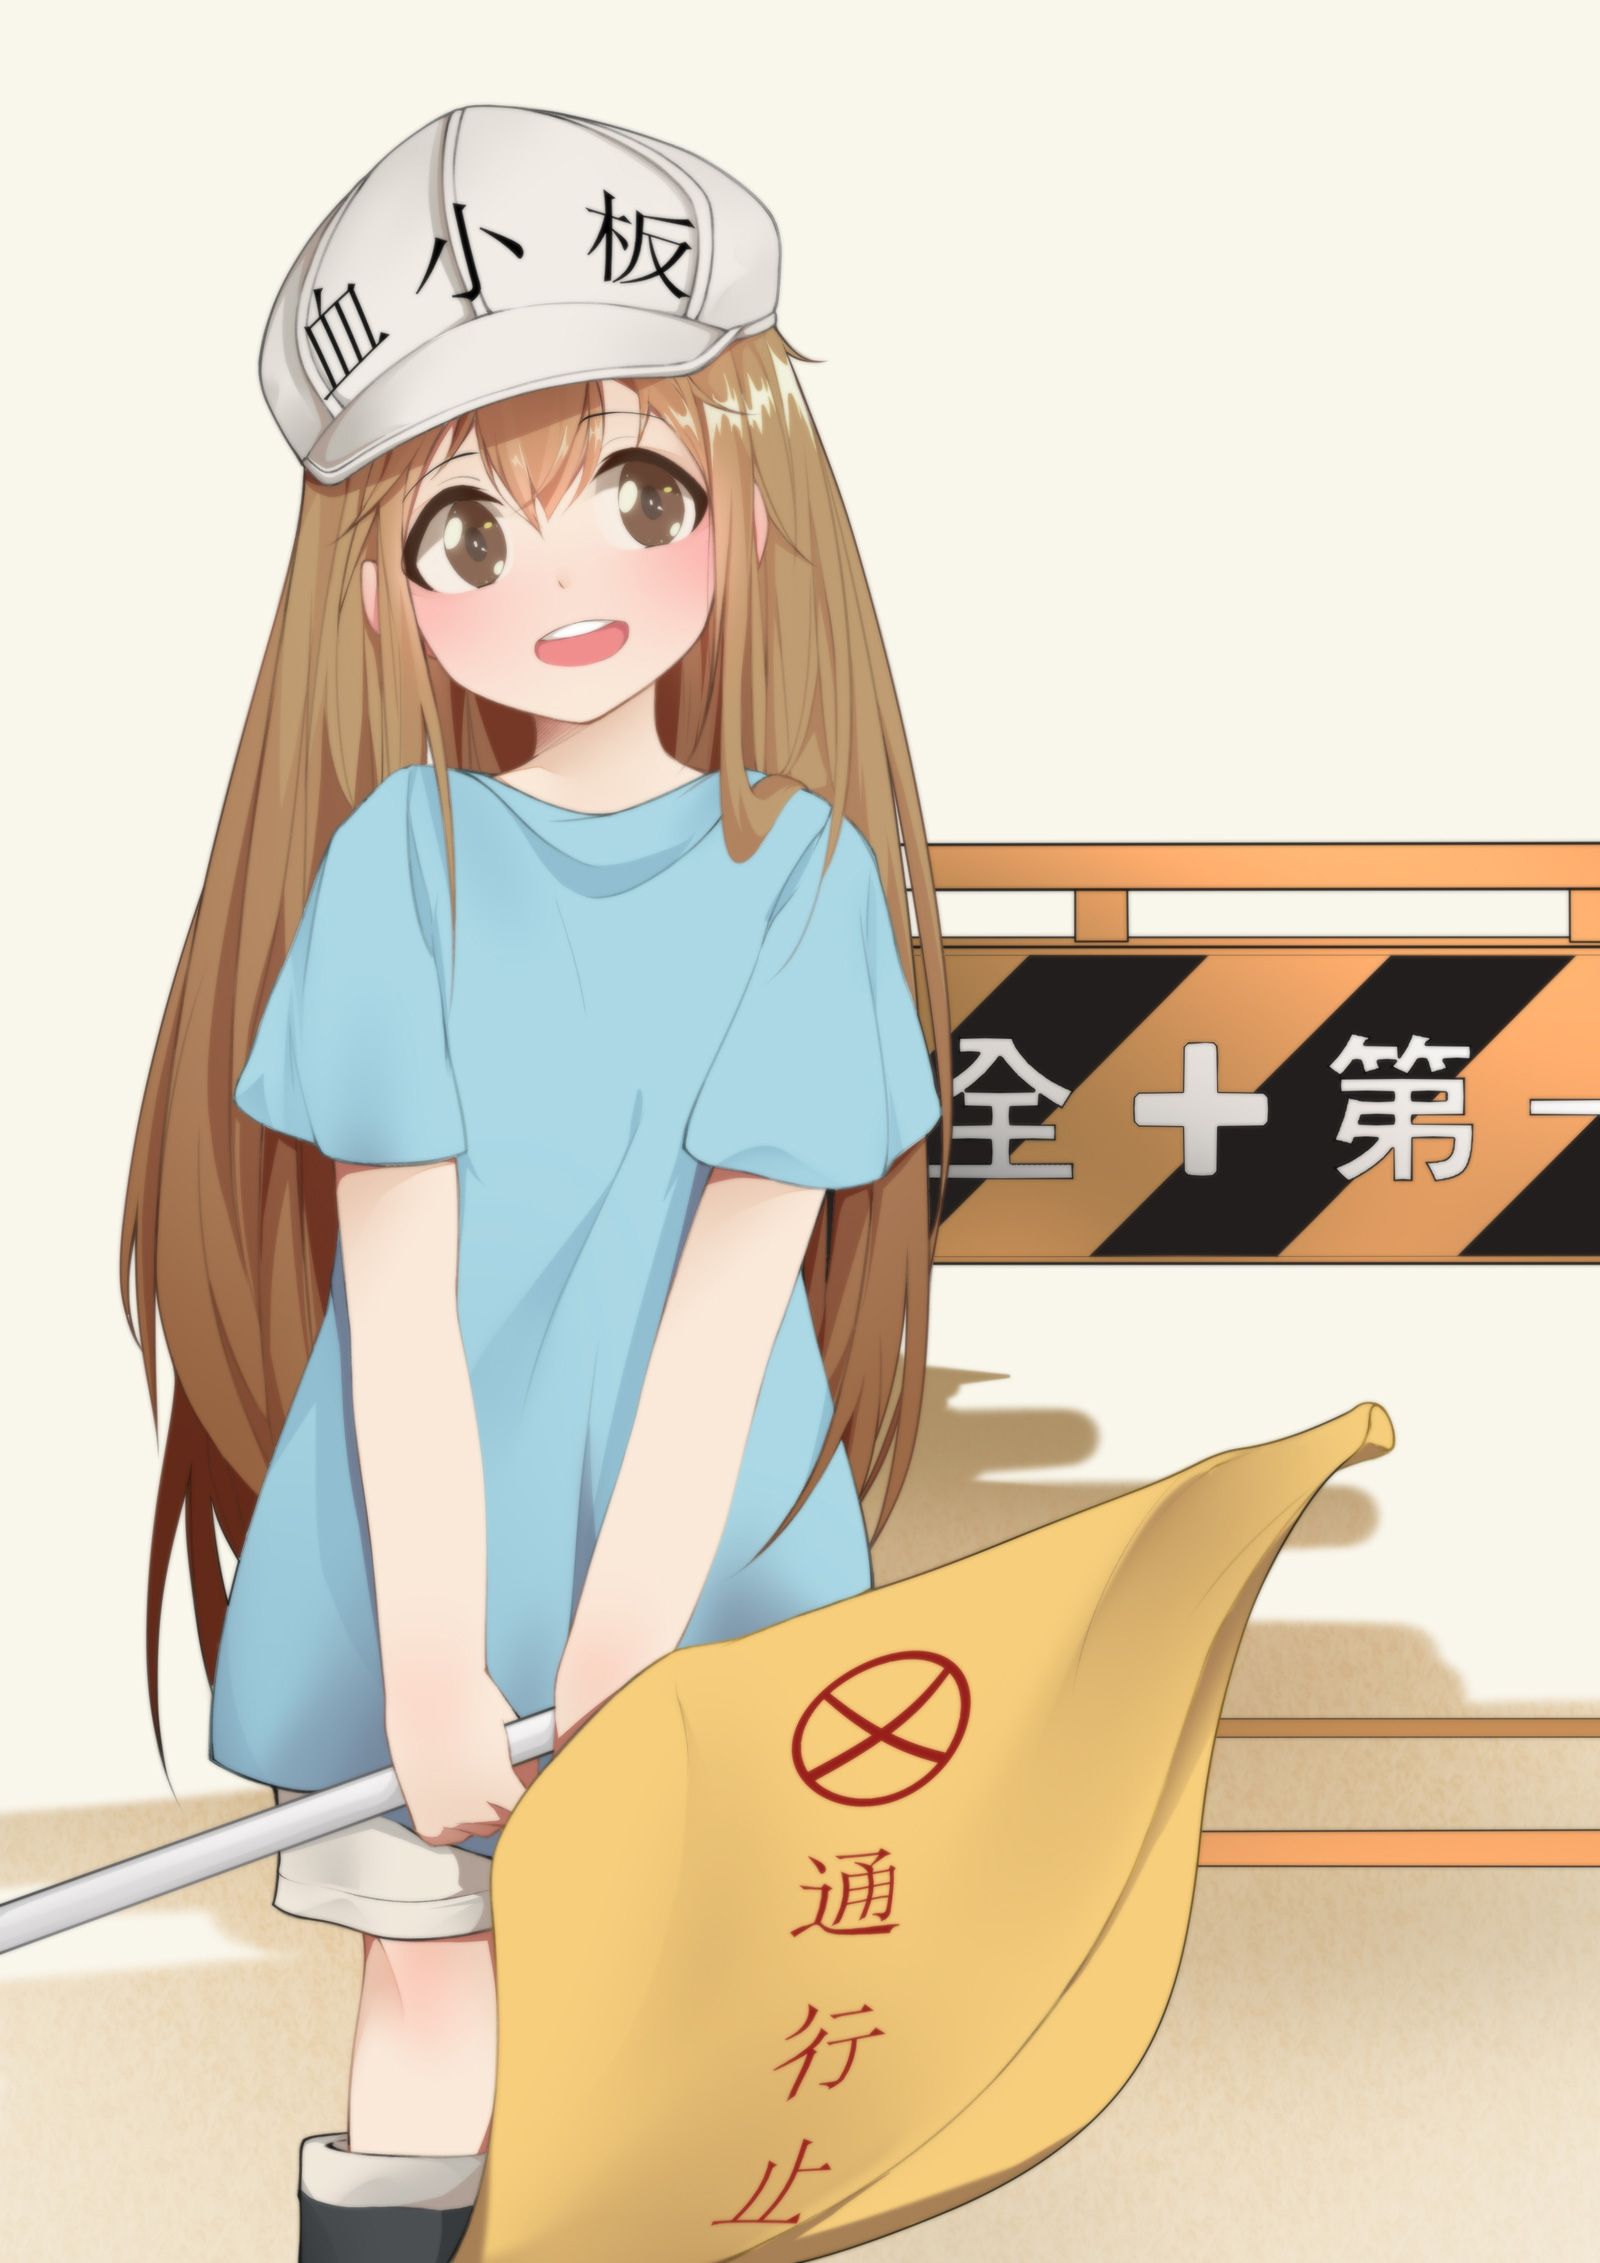 [Working cells] secondary images of platelets 1 60 sheets [ero/non-erotic] 26